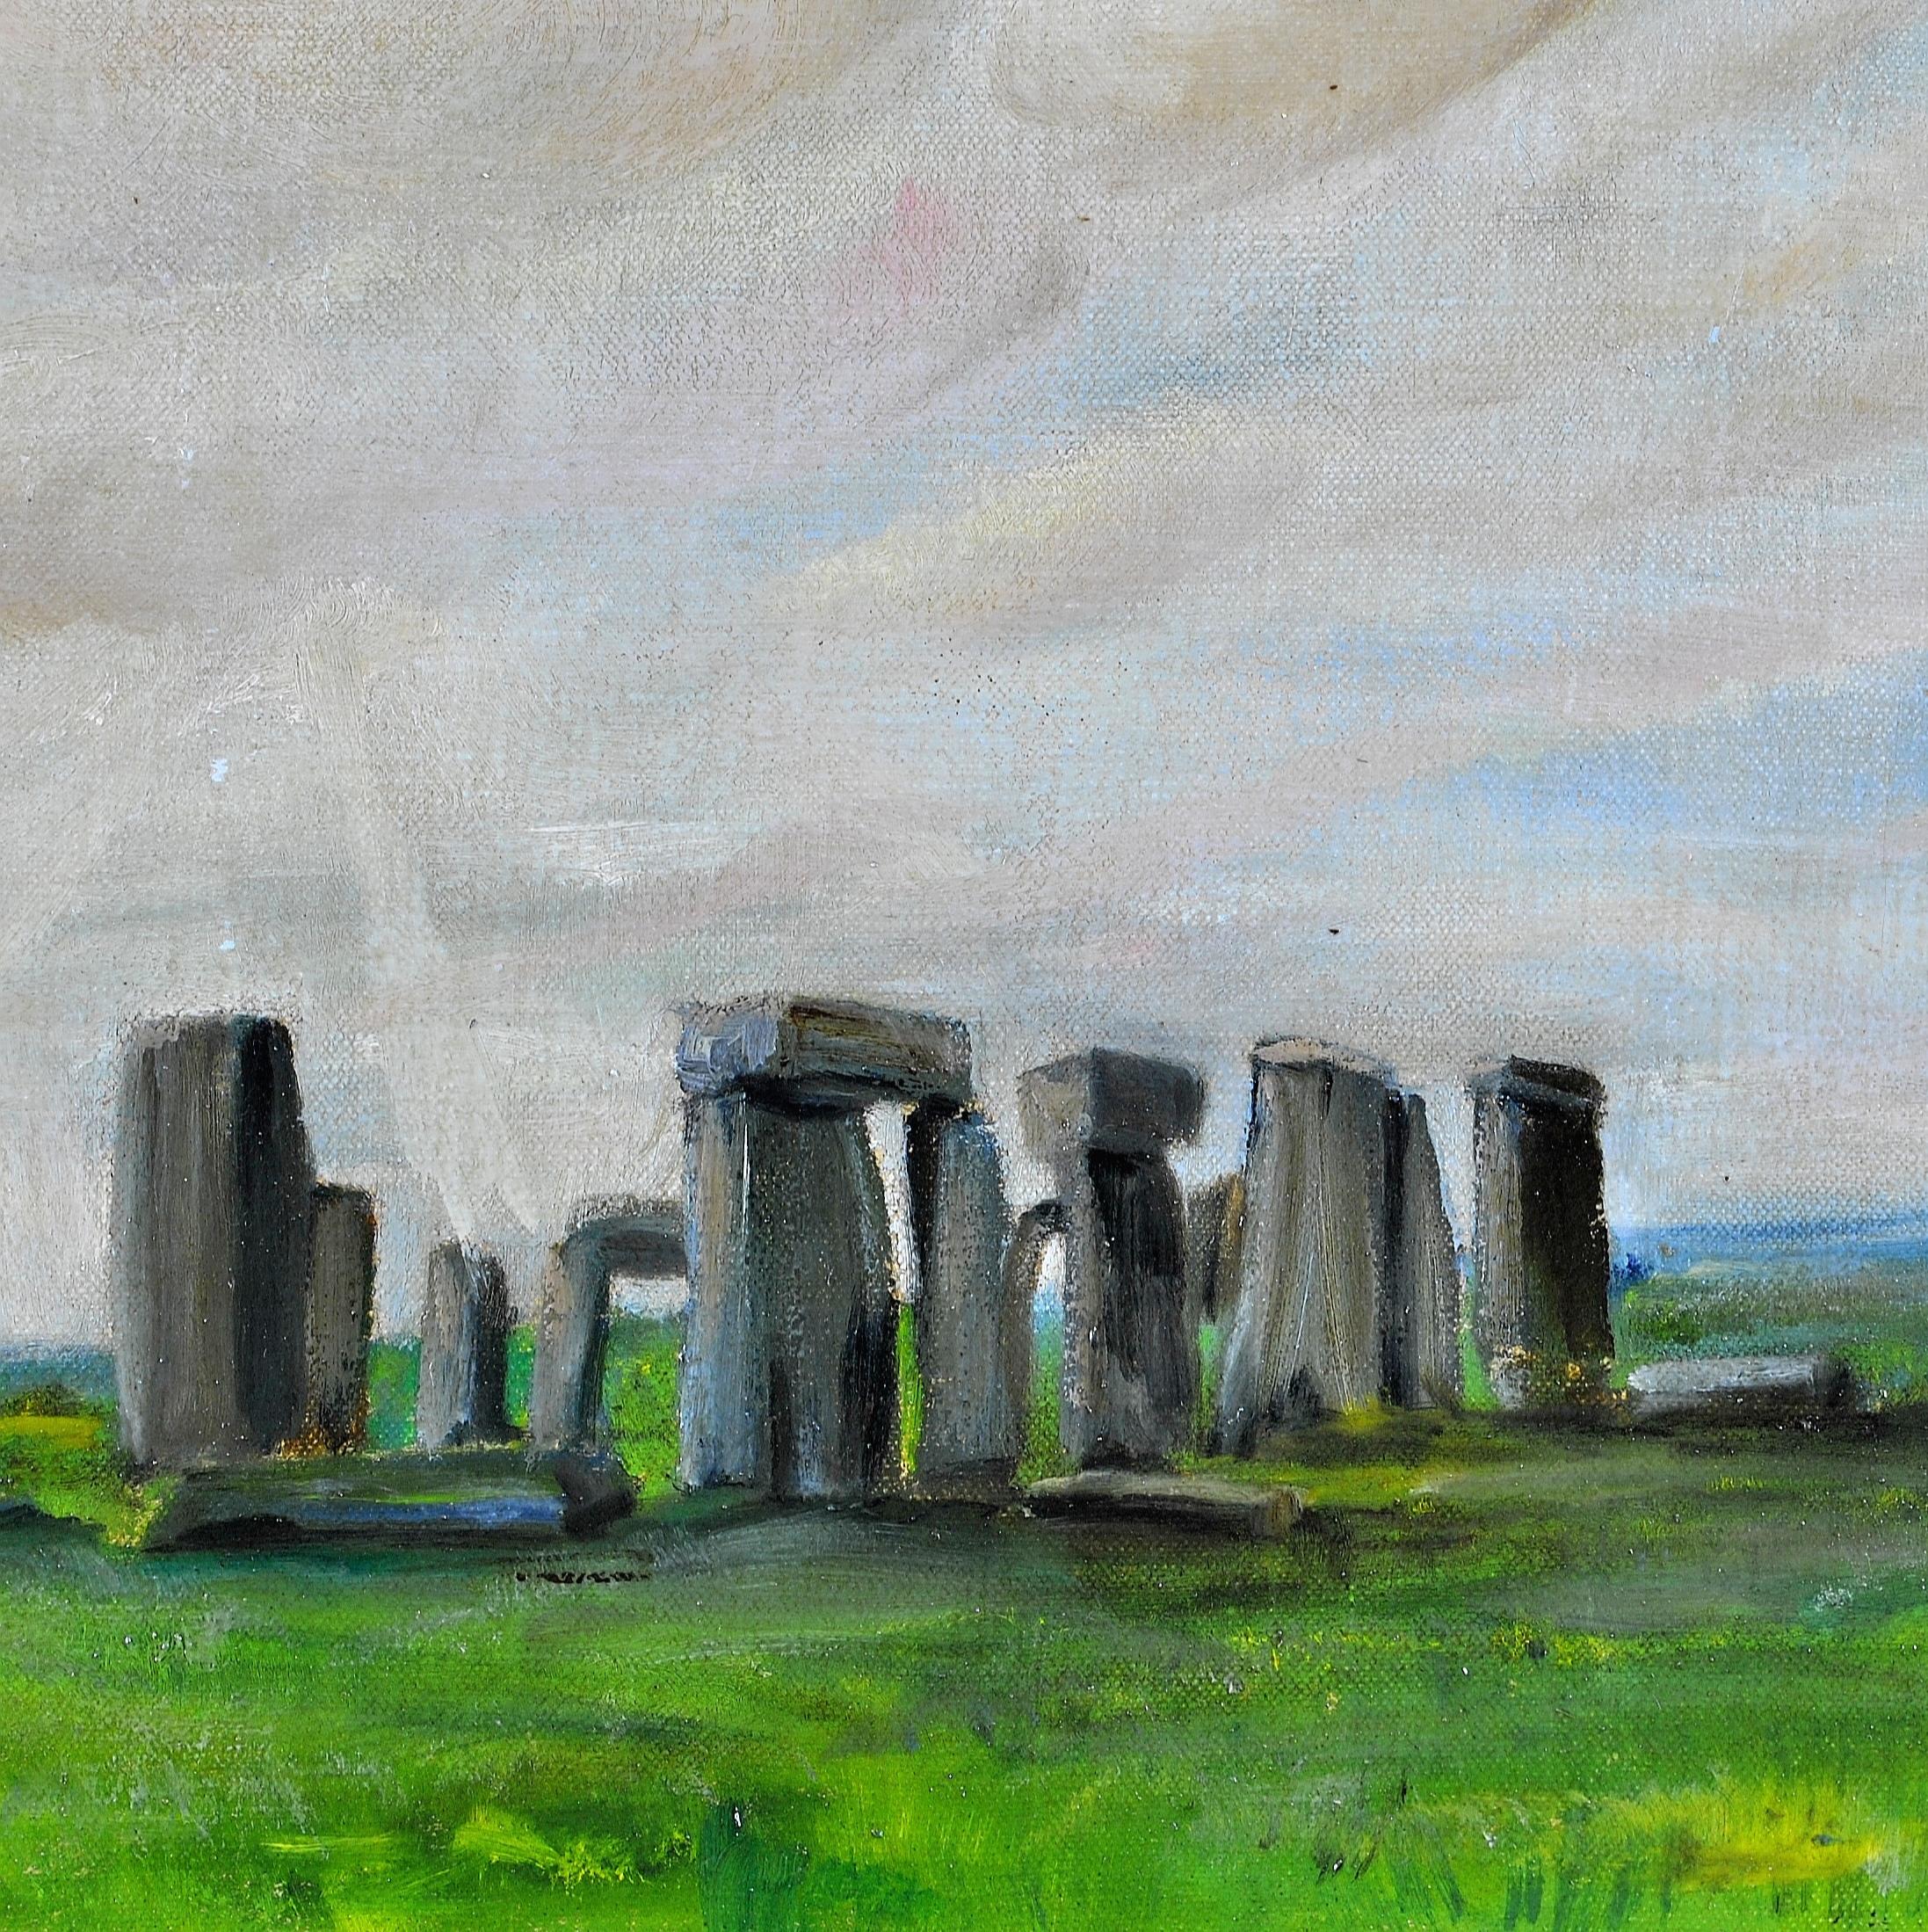 Stonehenge - Early 20th Century English Landscape Antique Oil on Canvas Painting - Gray Landscape Painting by Charles Henry Harrison Burleigh